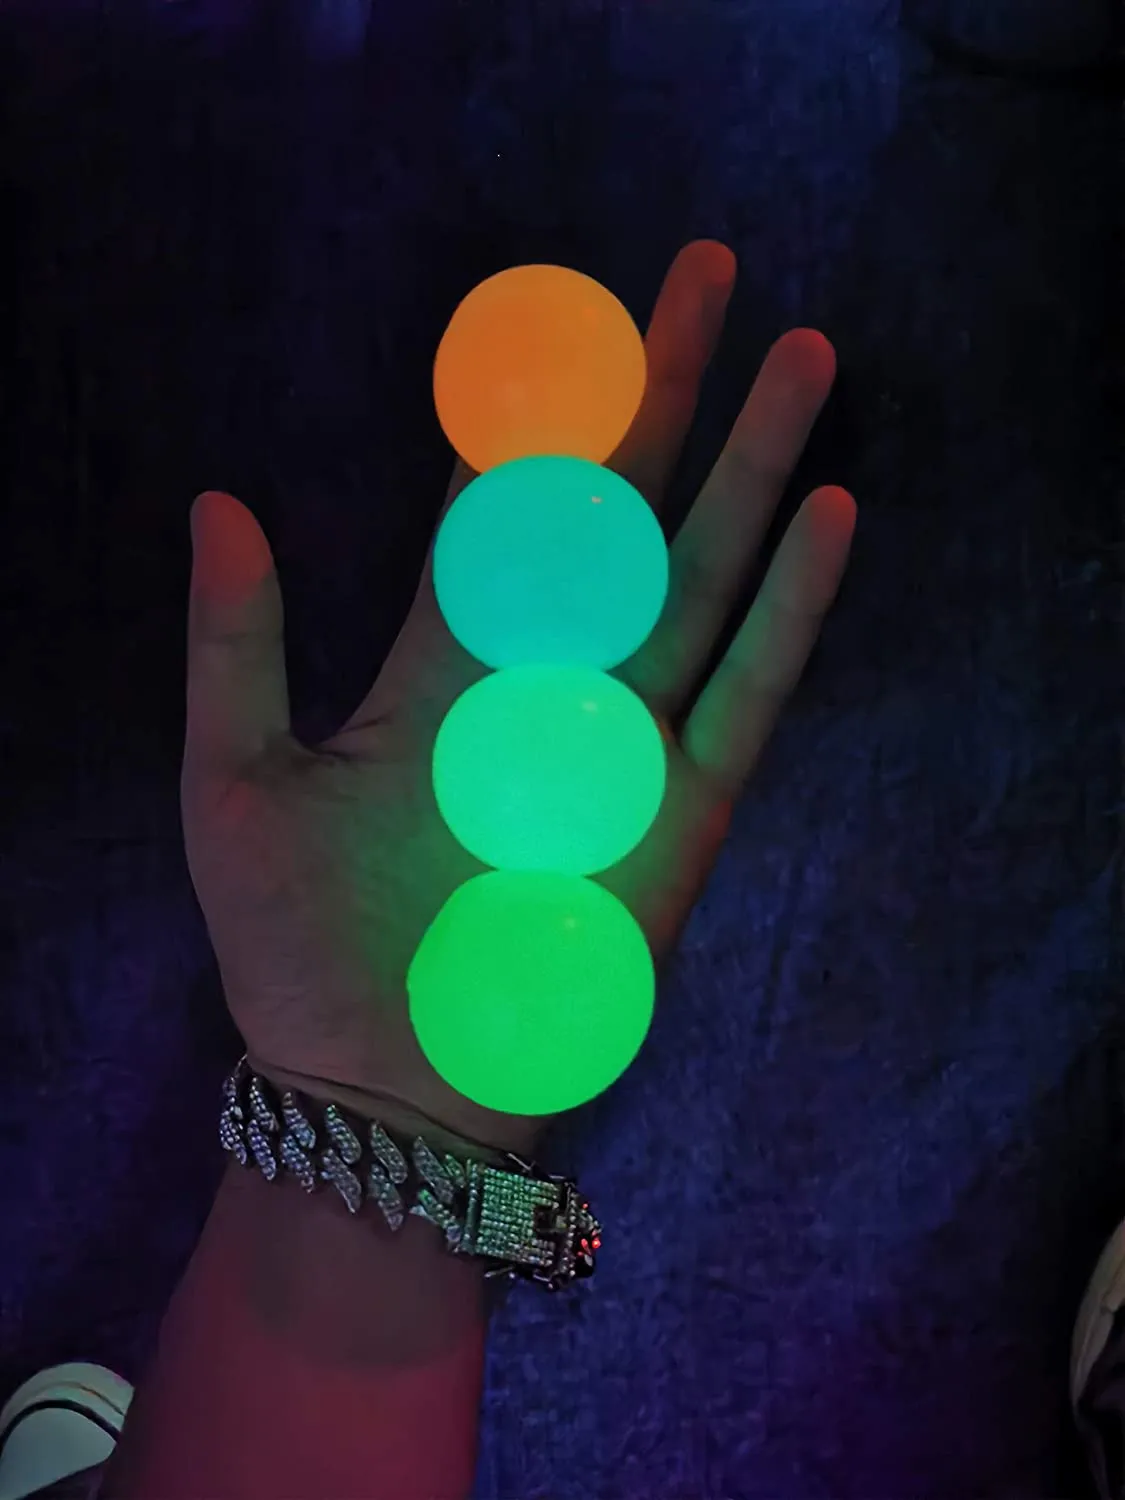 TR 4PCs Squeeze Toys Luminous Sticky Wall Balls Stress Reliever Toy Decompression Squishy 4 Color Fidget Adult Kids Gift